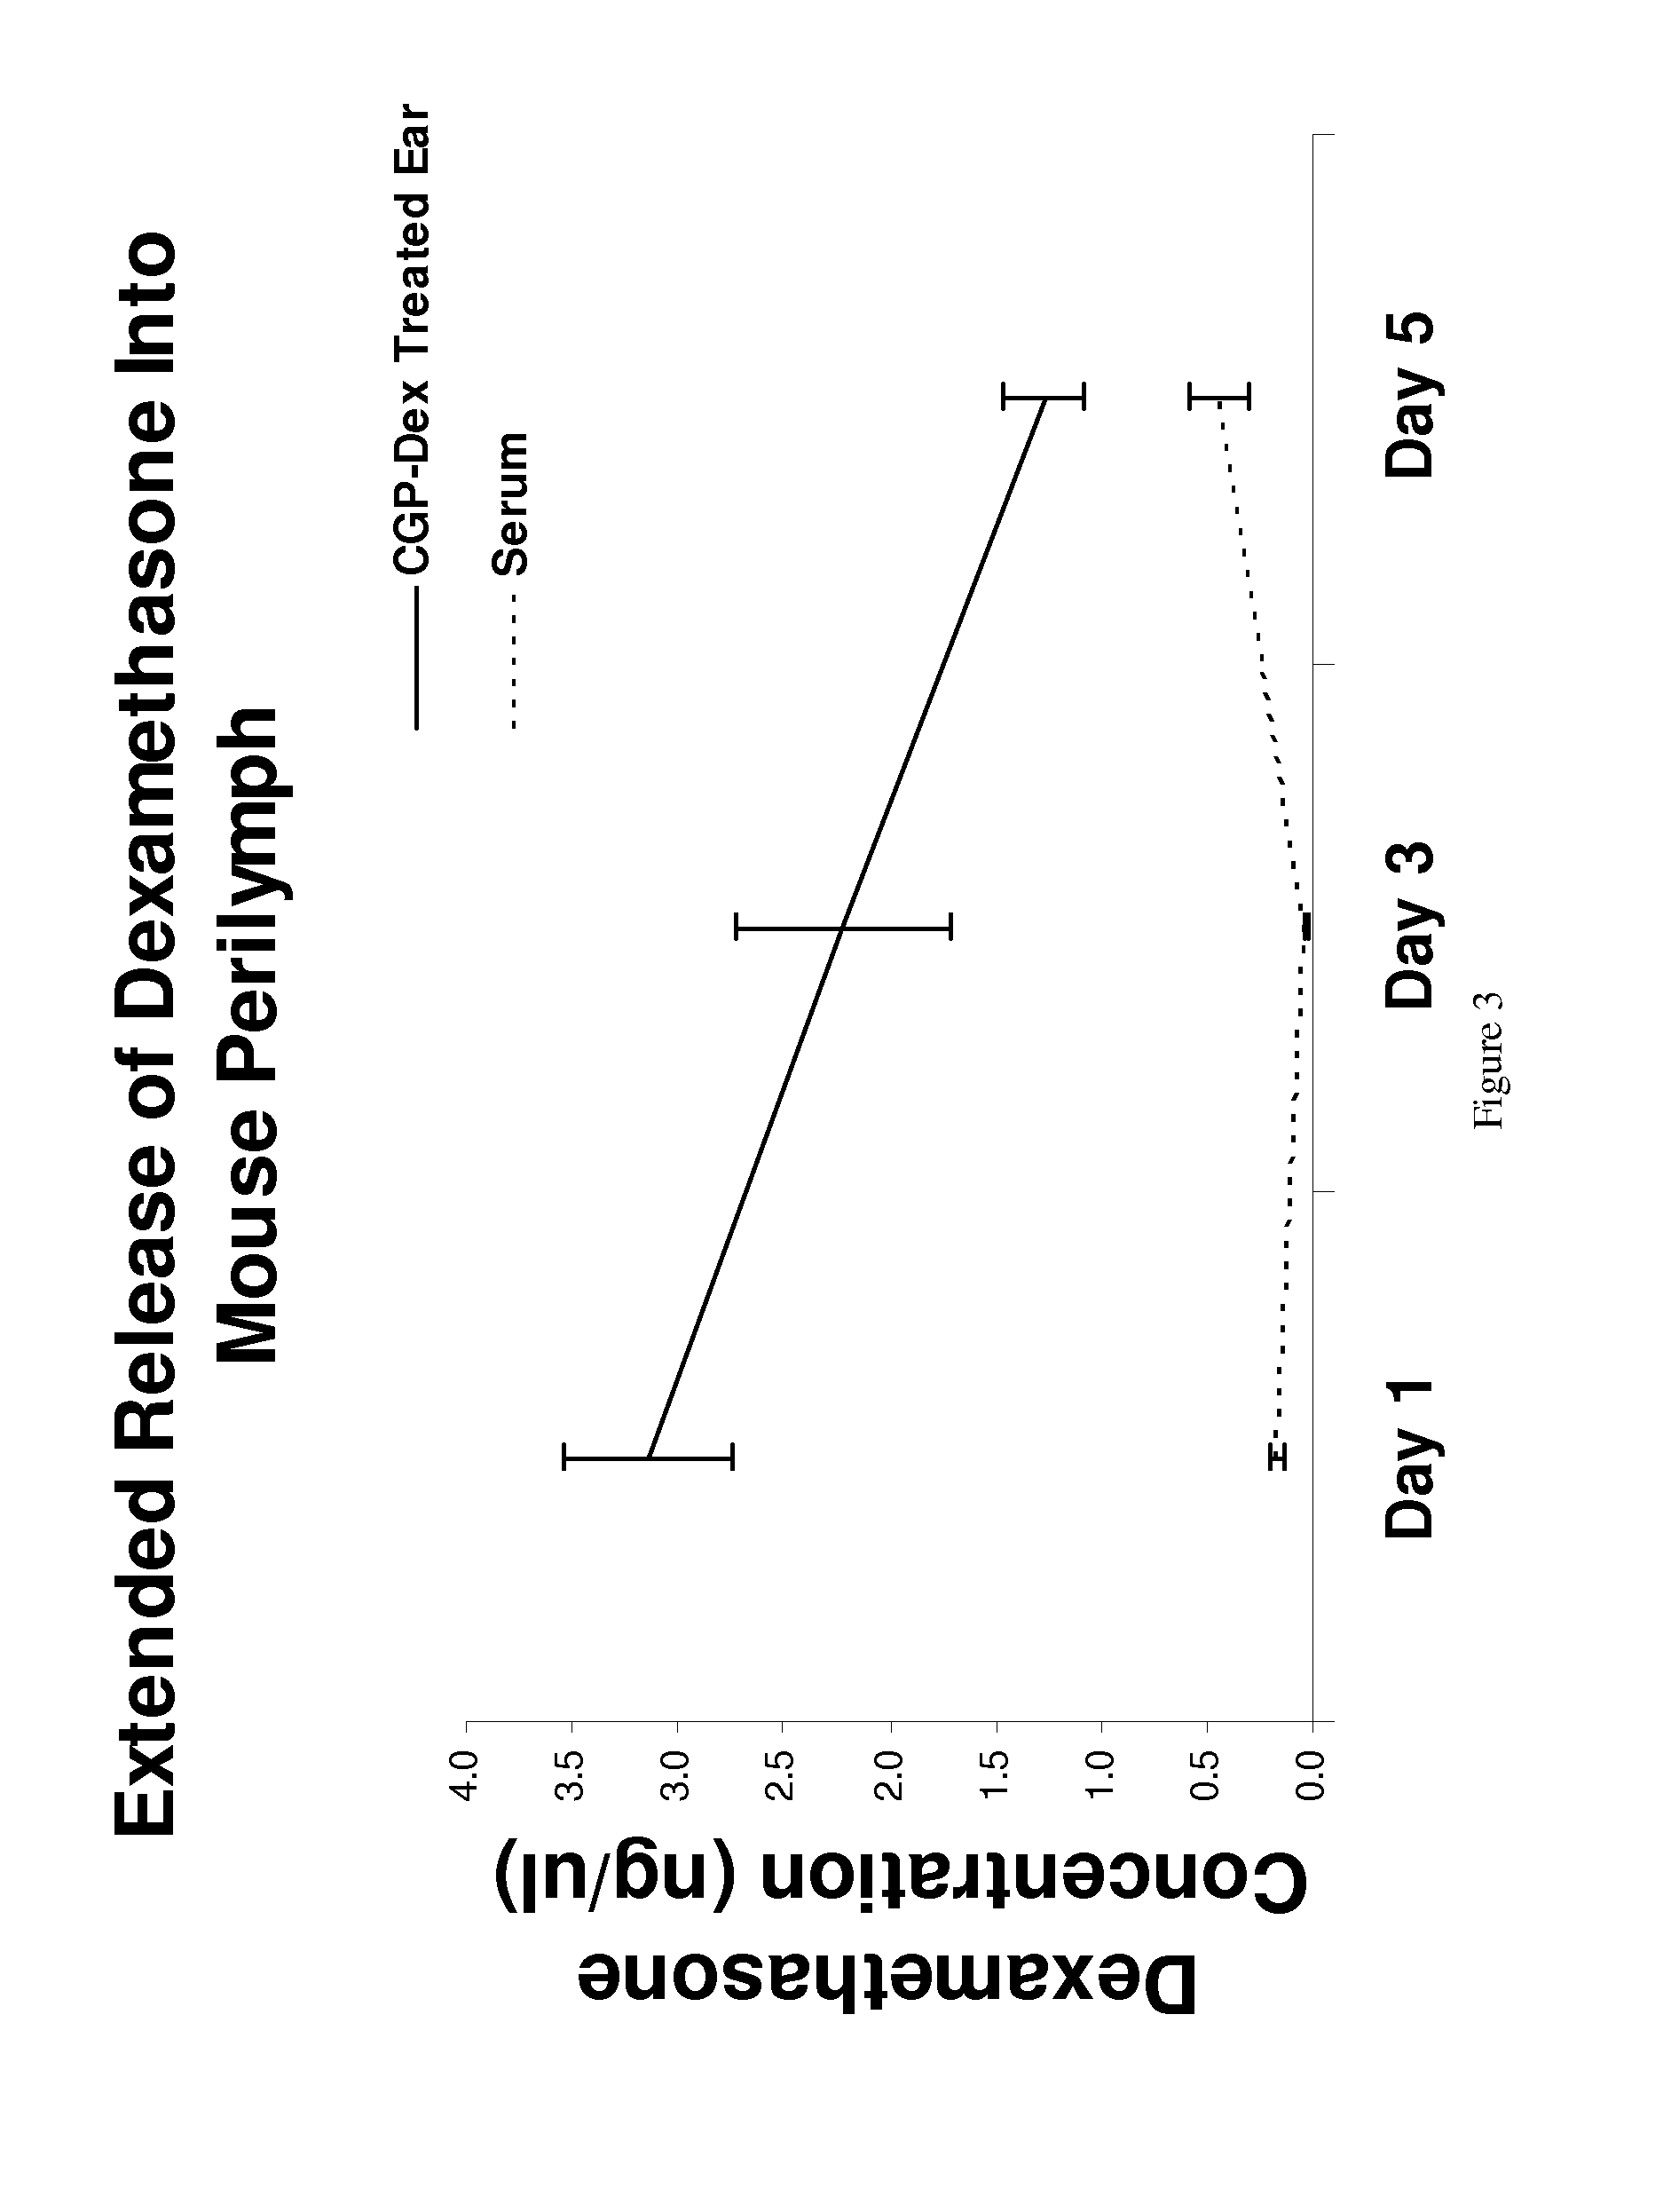 Regulated delivery systems for inner ear drug application and uses thereof